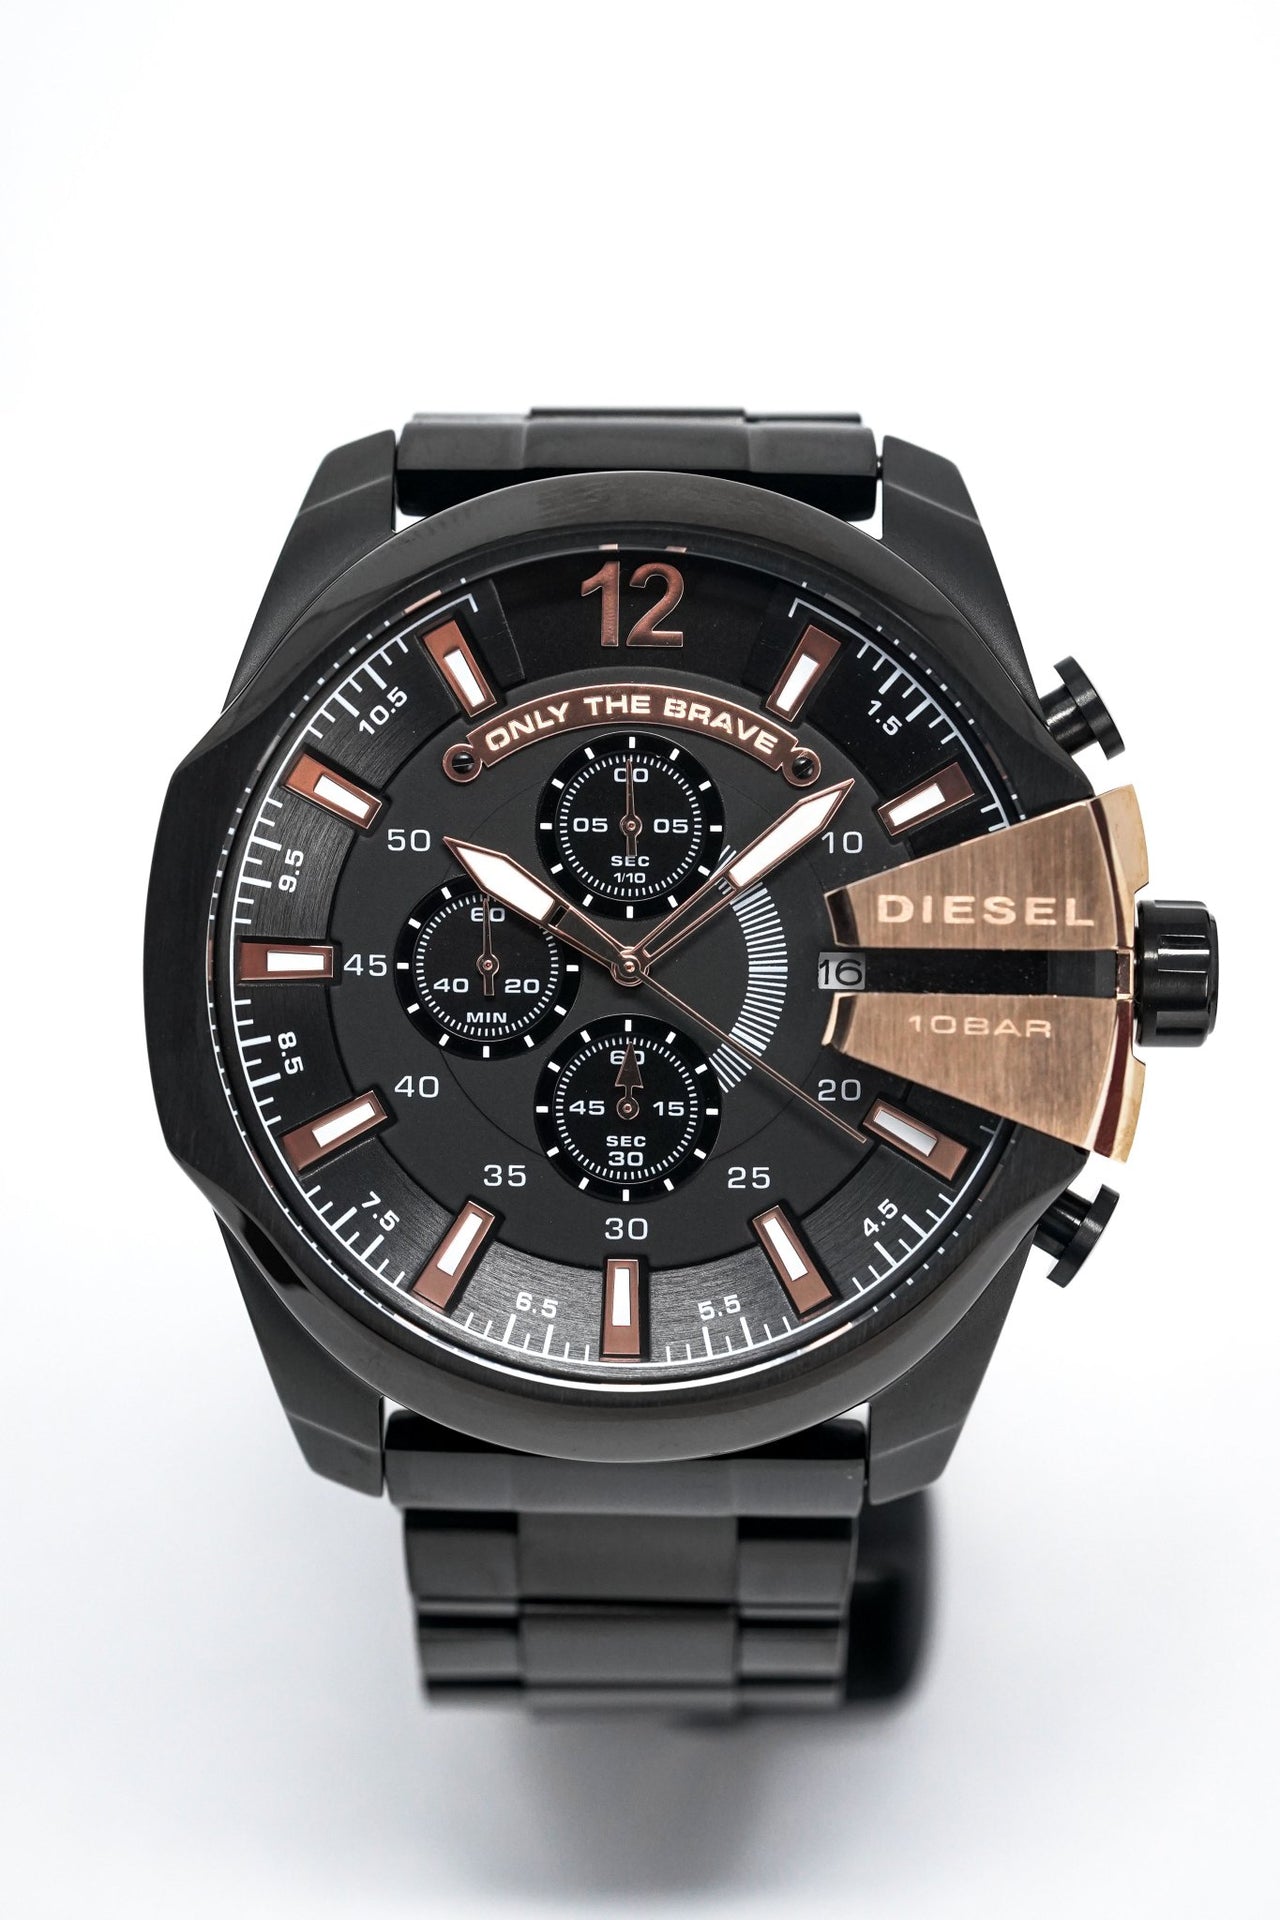 Diesel Men's Chronograph Watch Mega Chief IP Rose Gold – Watches & Crystals